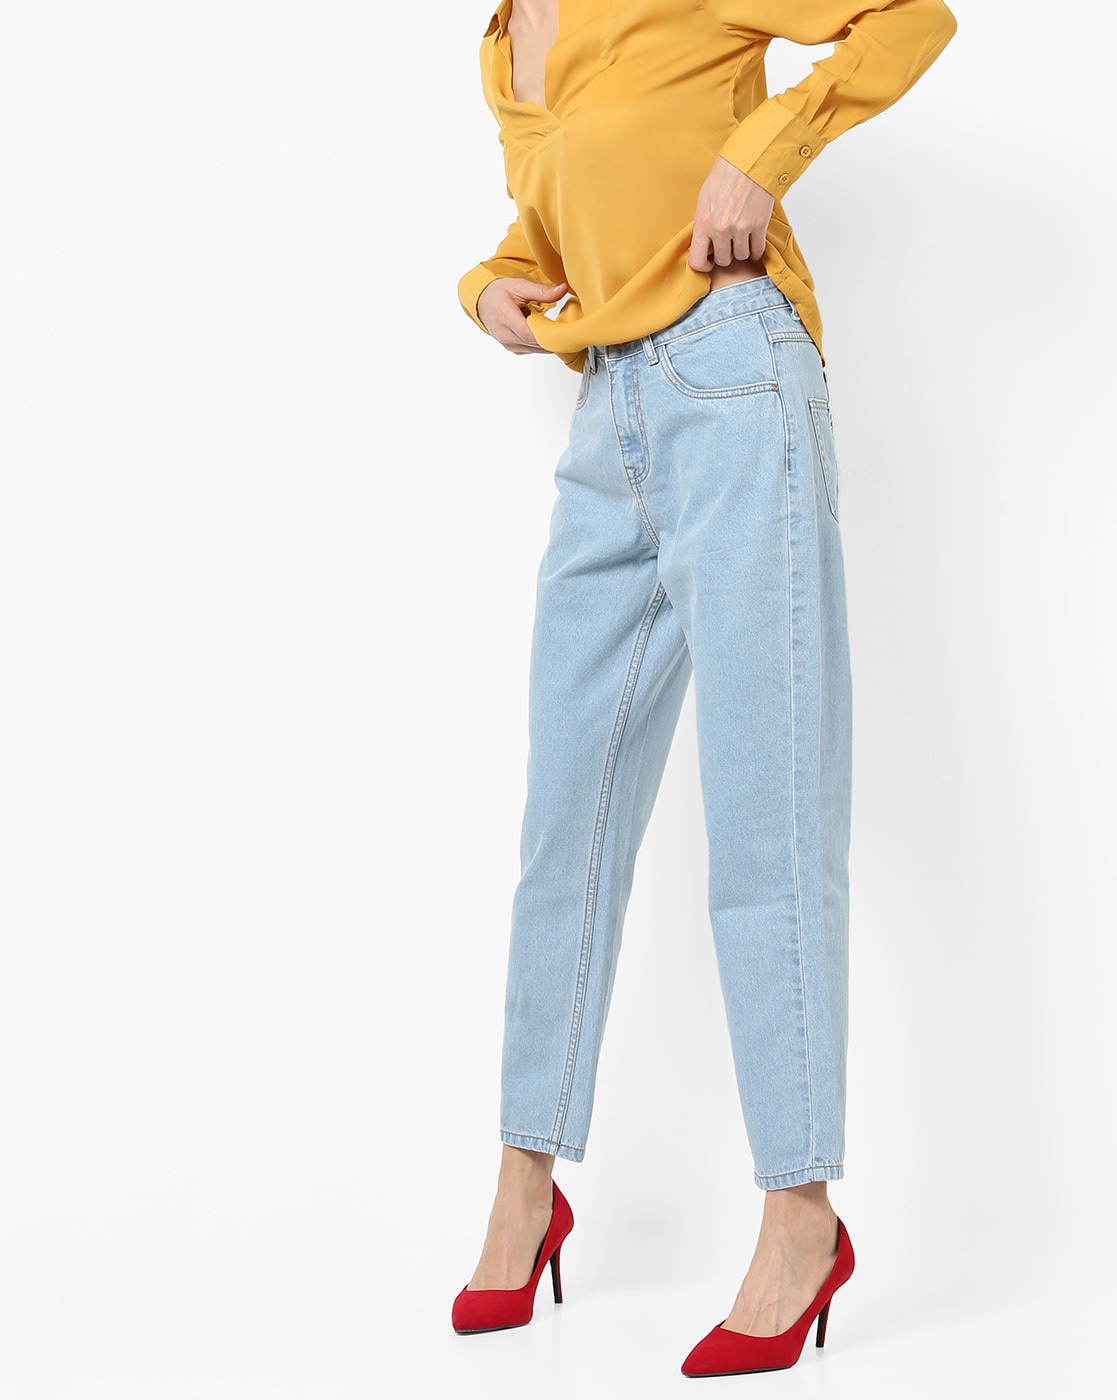 mom jeans online shopping